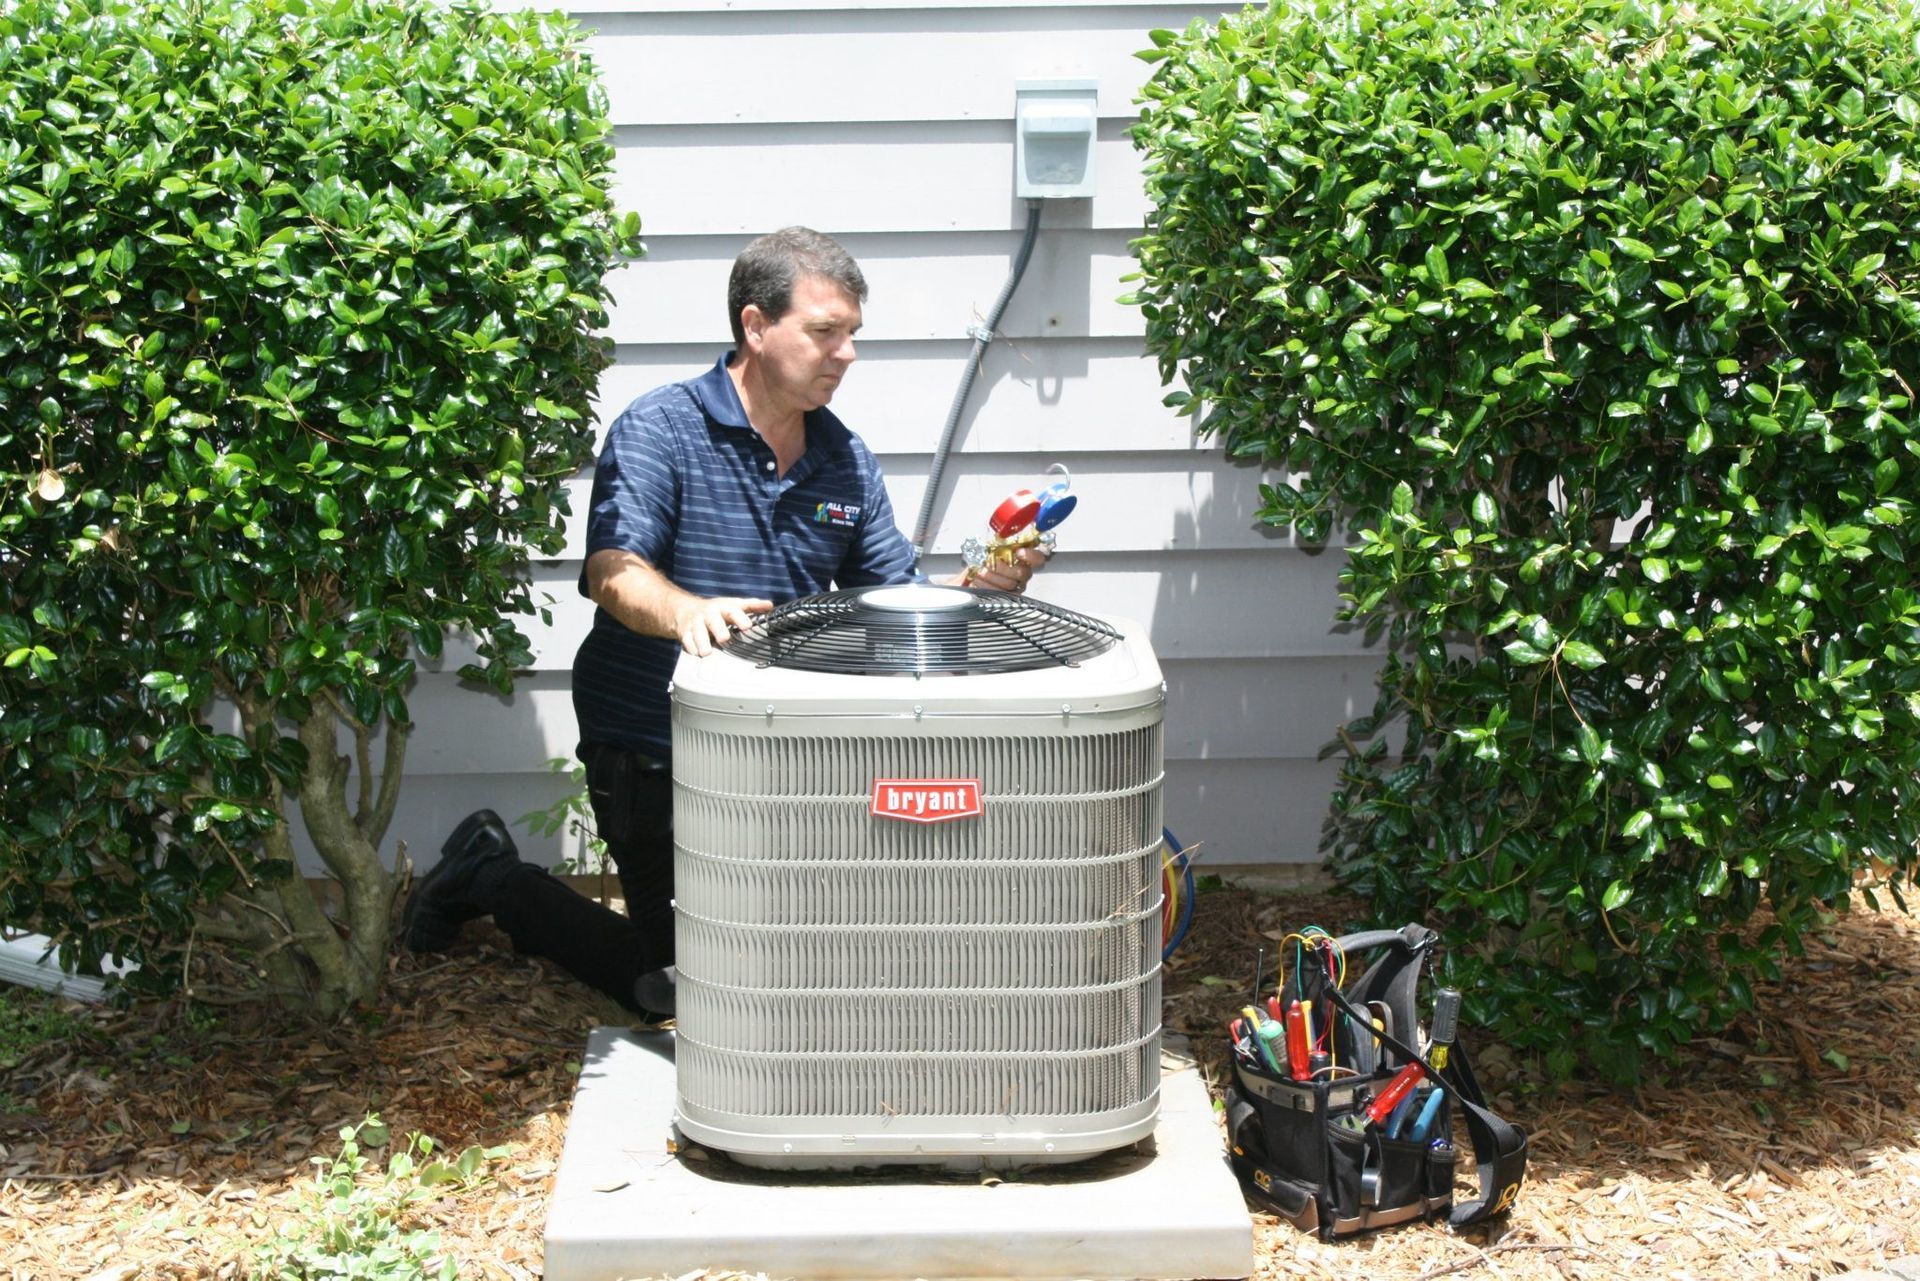 All City Heat and Air technician is working on an air conditioner outside of a house .